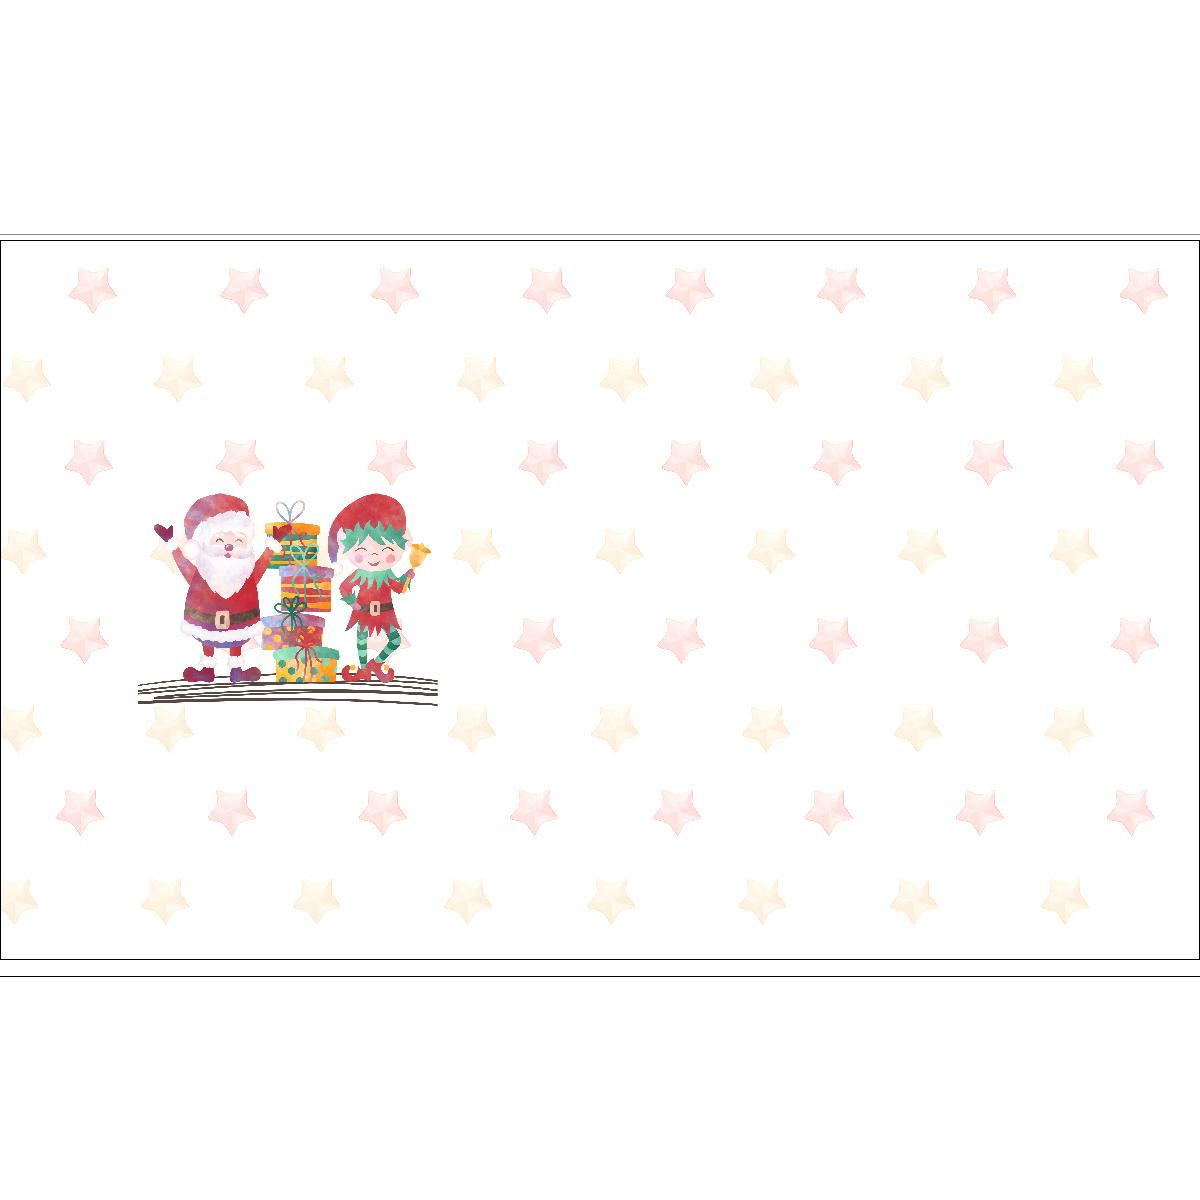 SANTA CLAUS AND ELF / presents (CHRISTMAS FRIENDS) - Cotton woven fabric panel / Choice of sizes